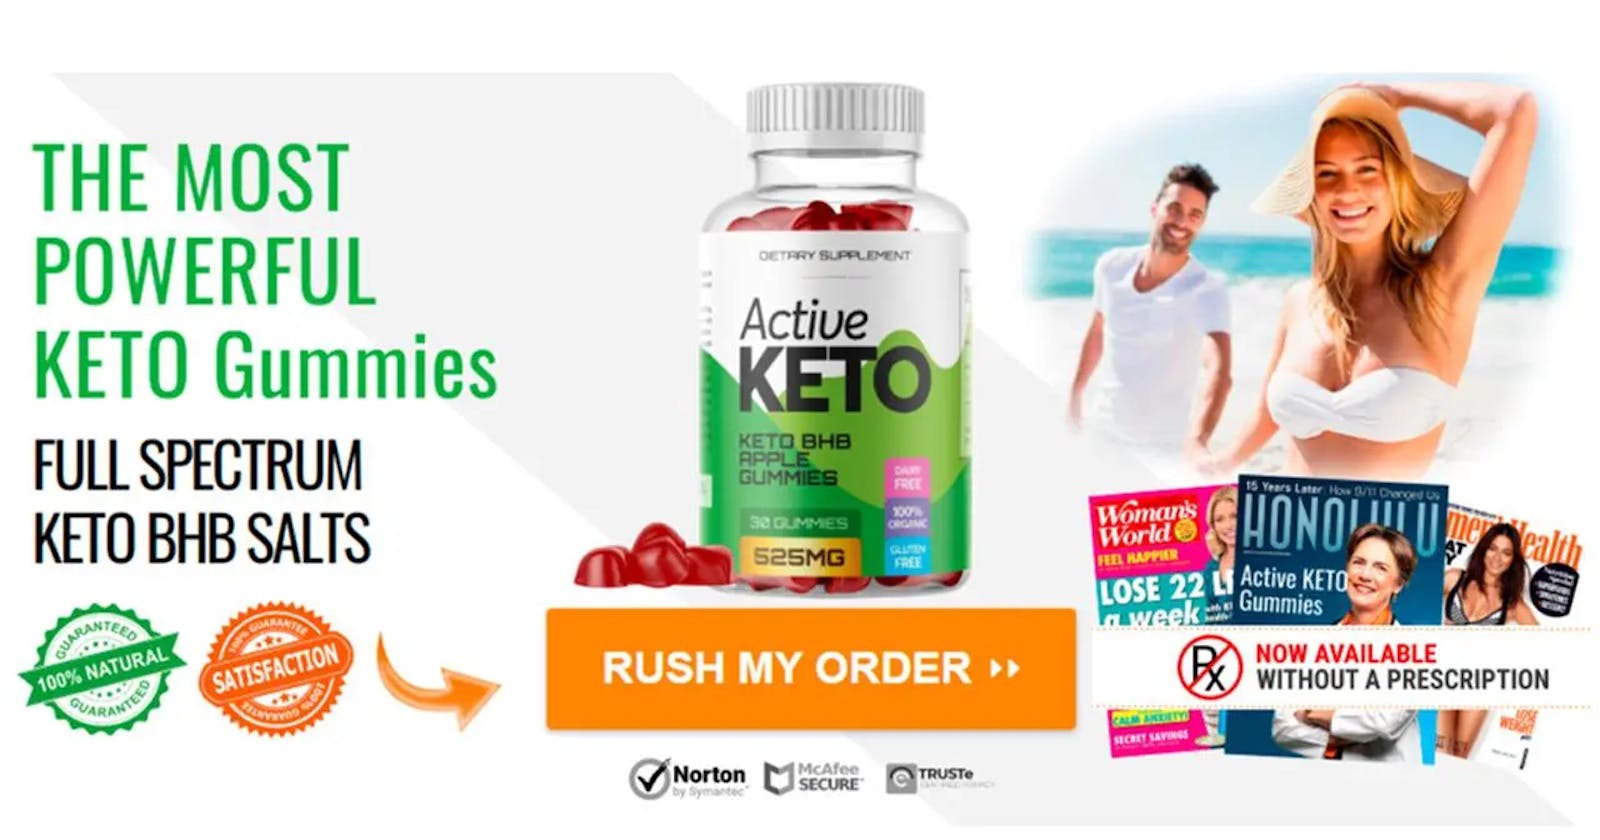 Active Keto Gummies Australia (Scam Alert Review) #1 Weight Loss Gummy Or Waste Of Money?